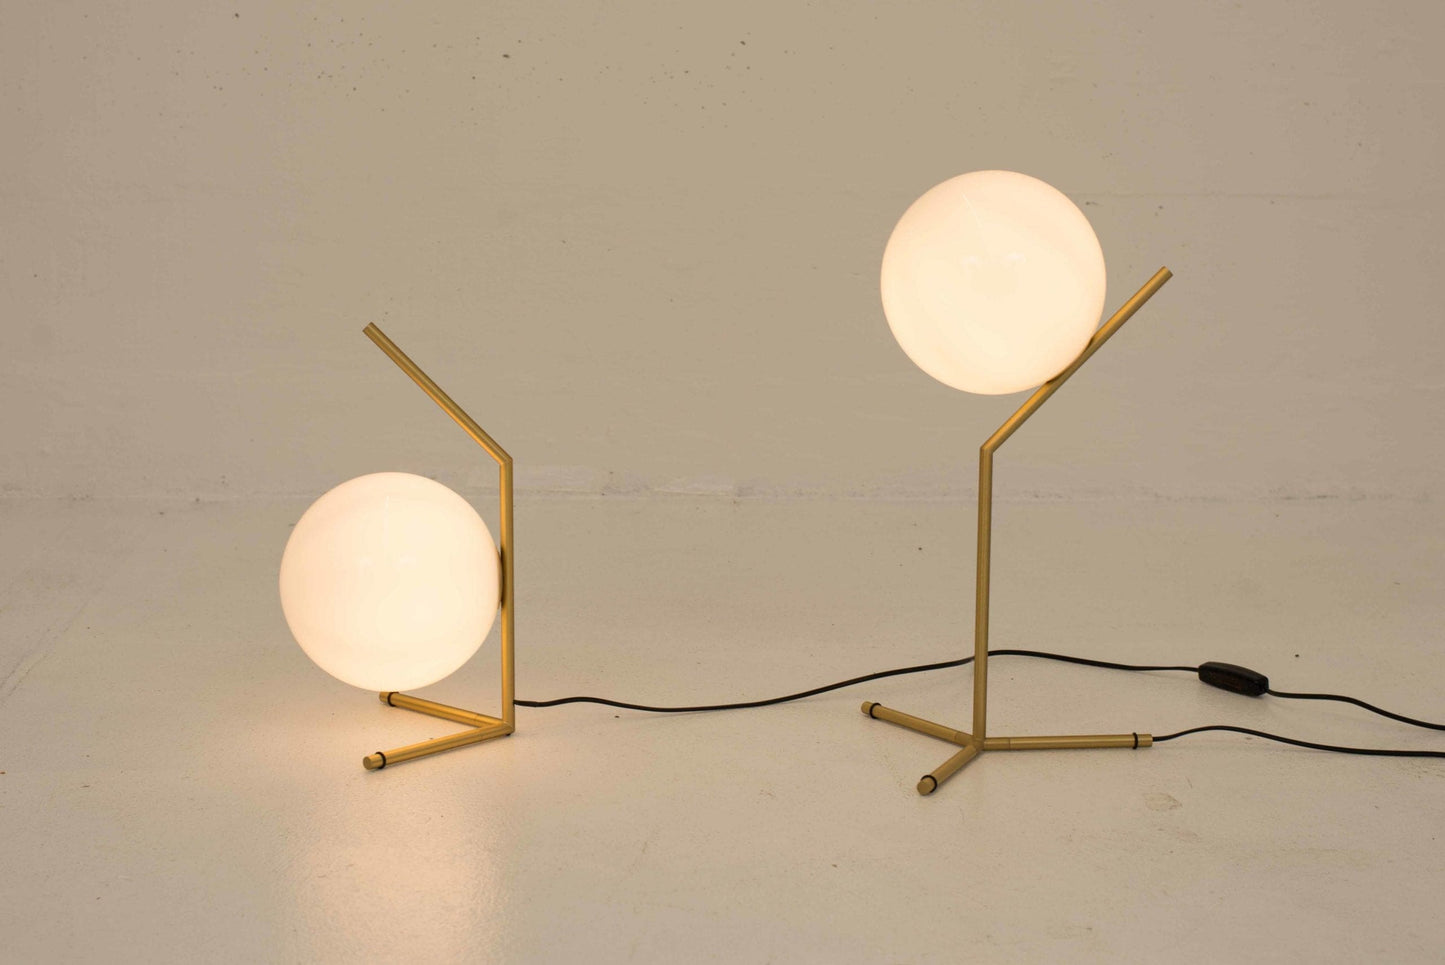 Flos IC1 Low table lamp by Michael Anastassiades